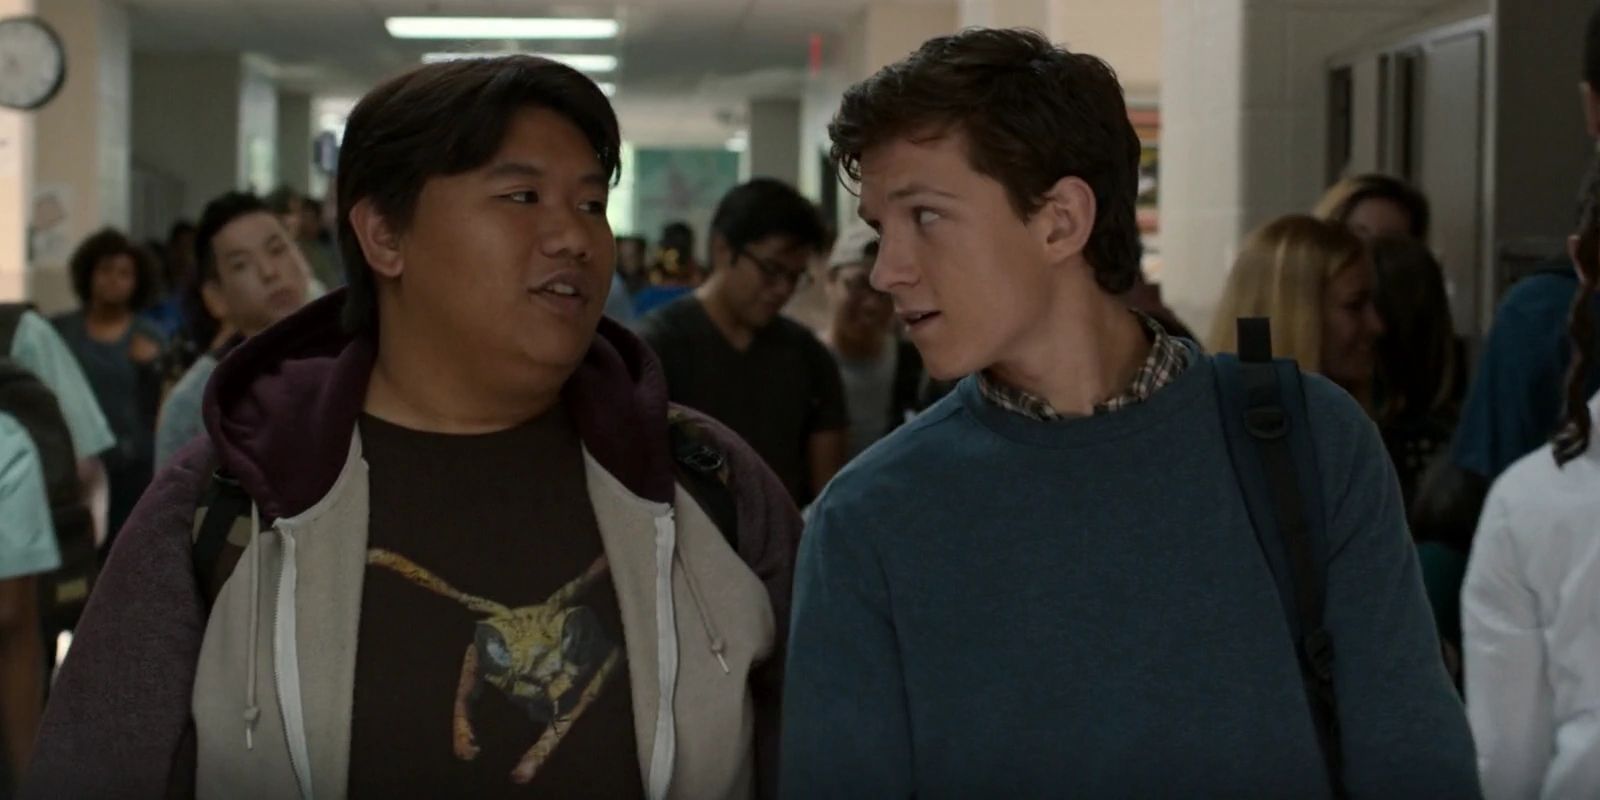 Peter Parker and Ned in School Homecoming